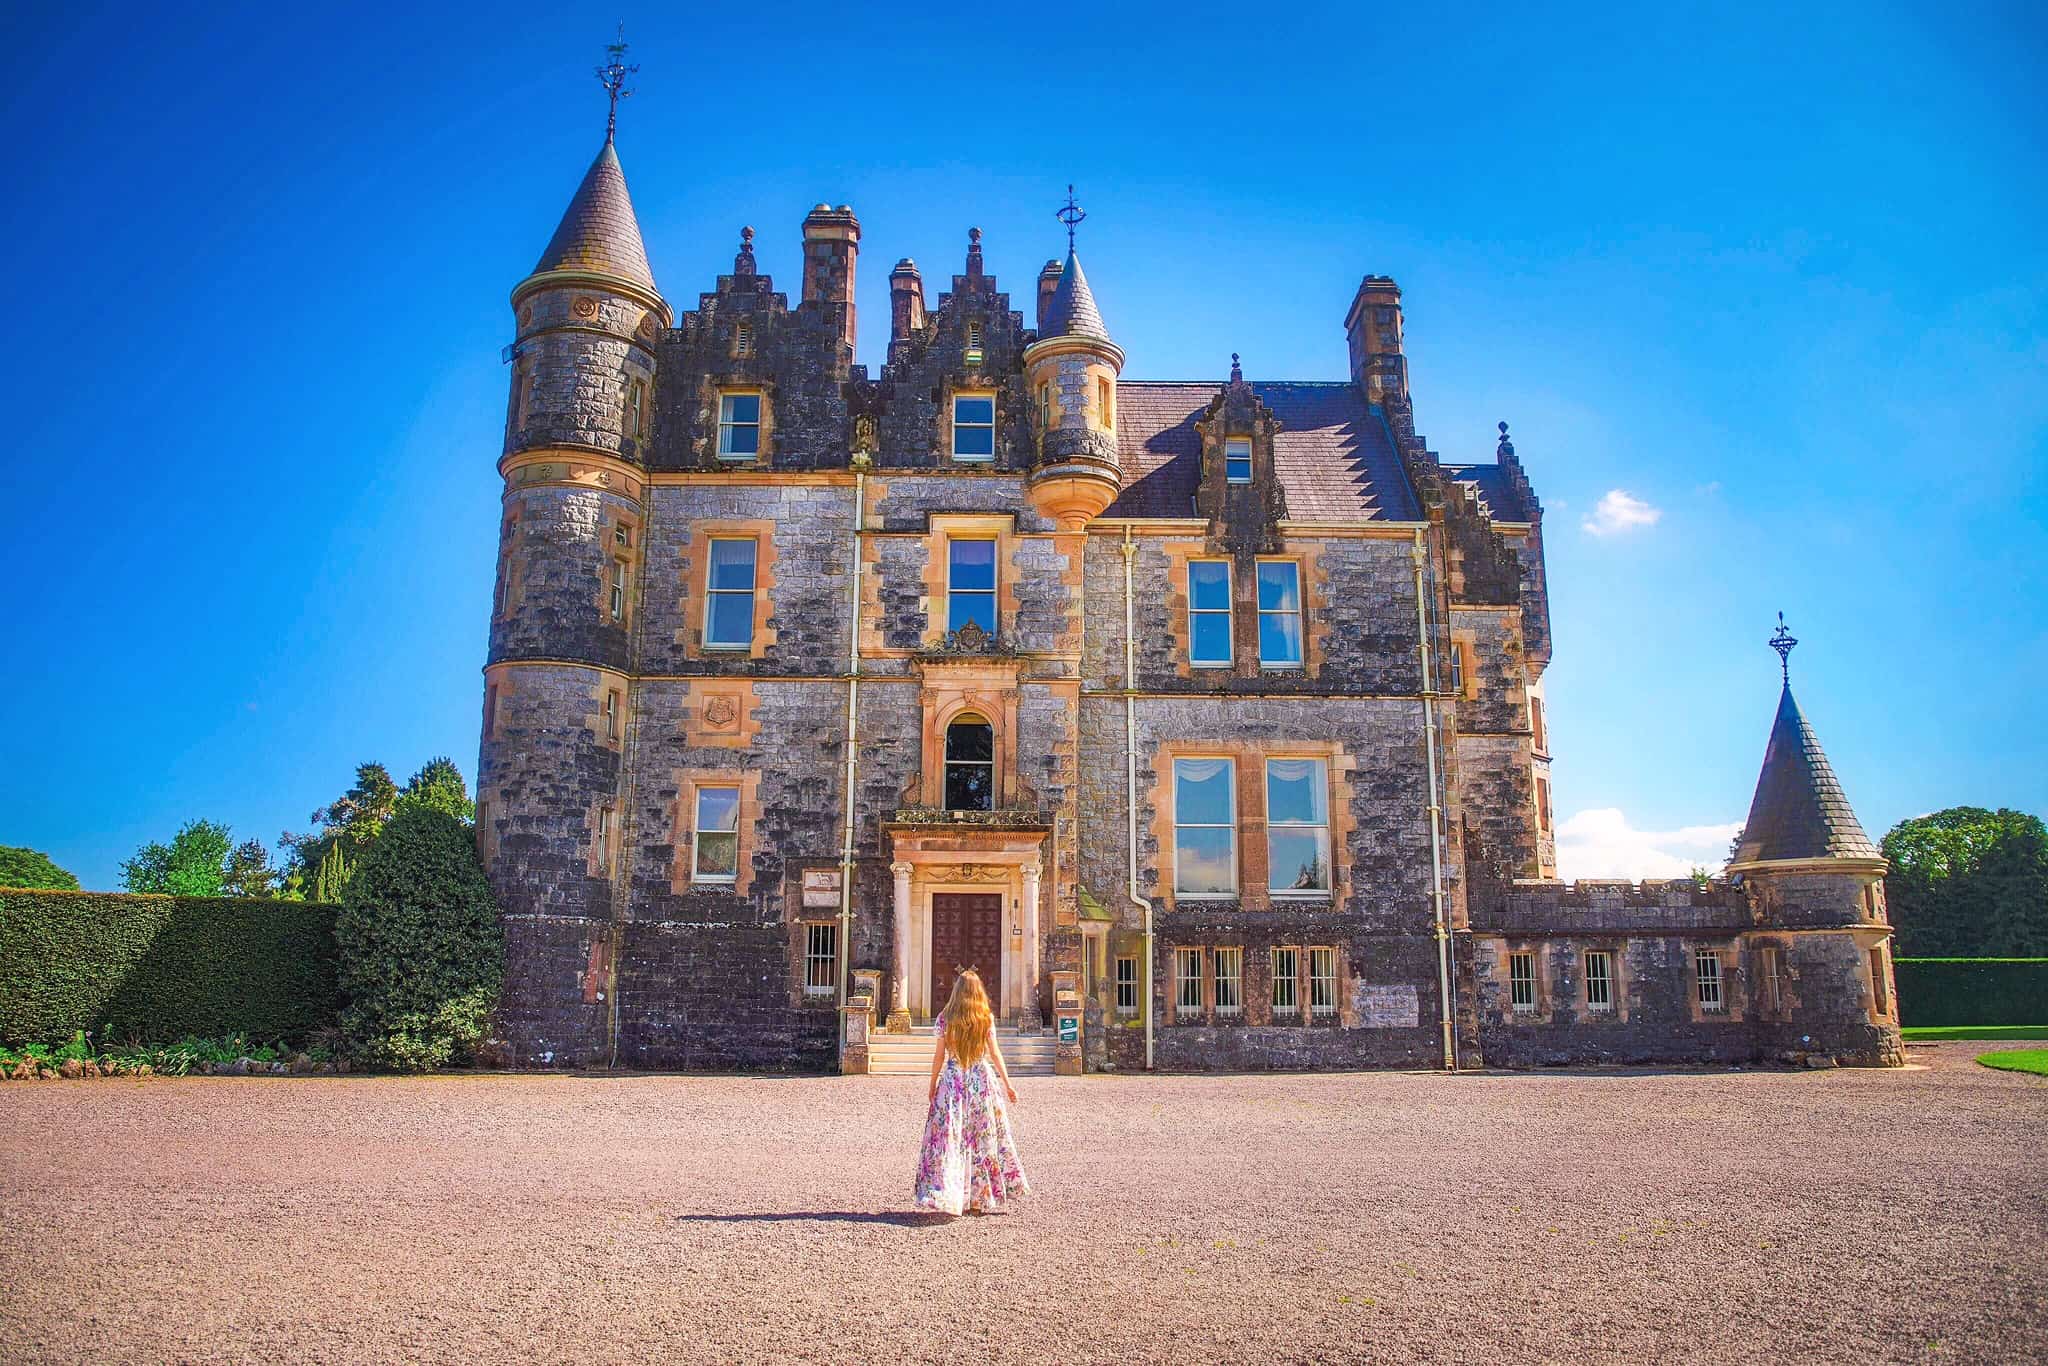 Woman in a dress in front of the stone Blarney Castle House on a sunny day.